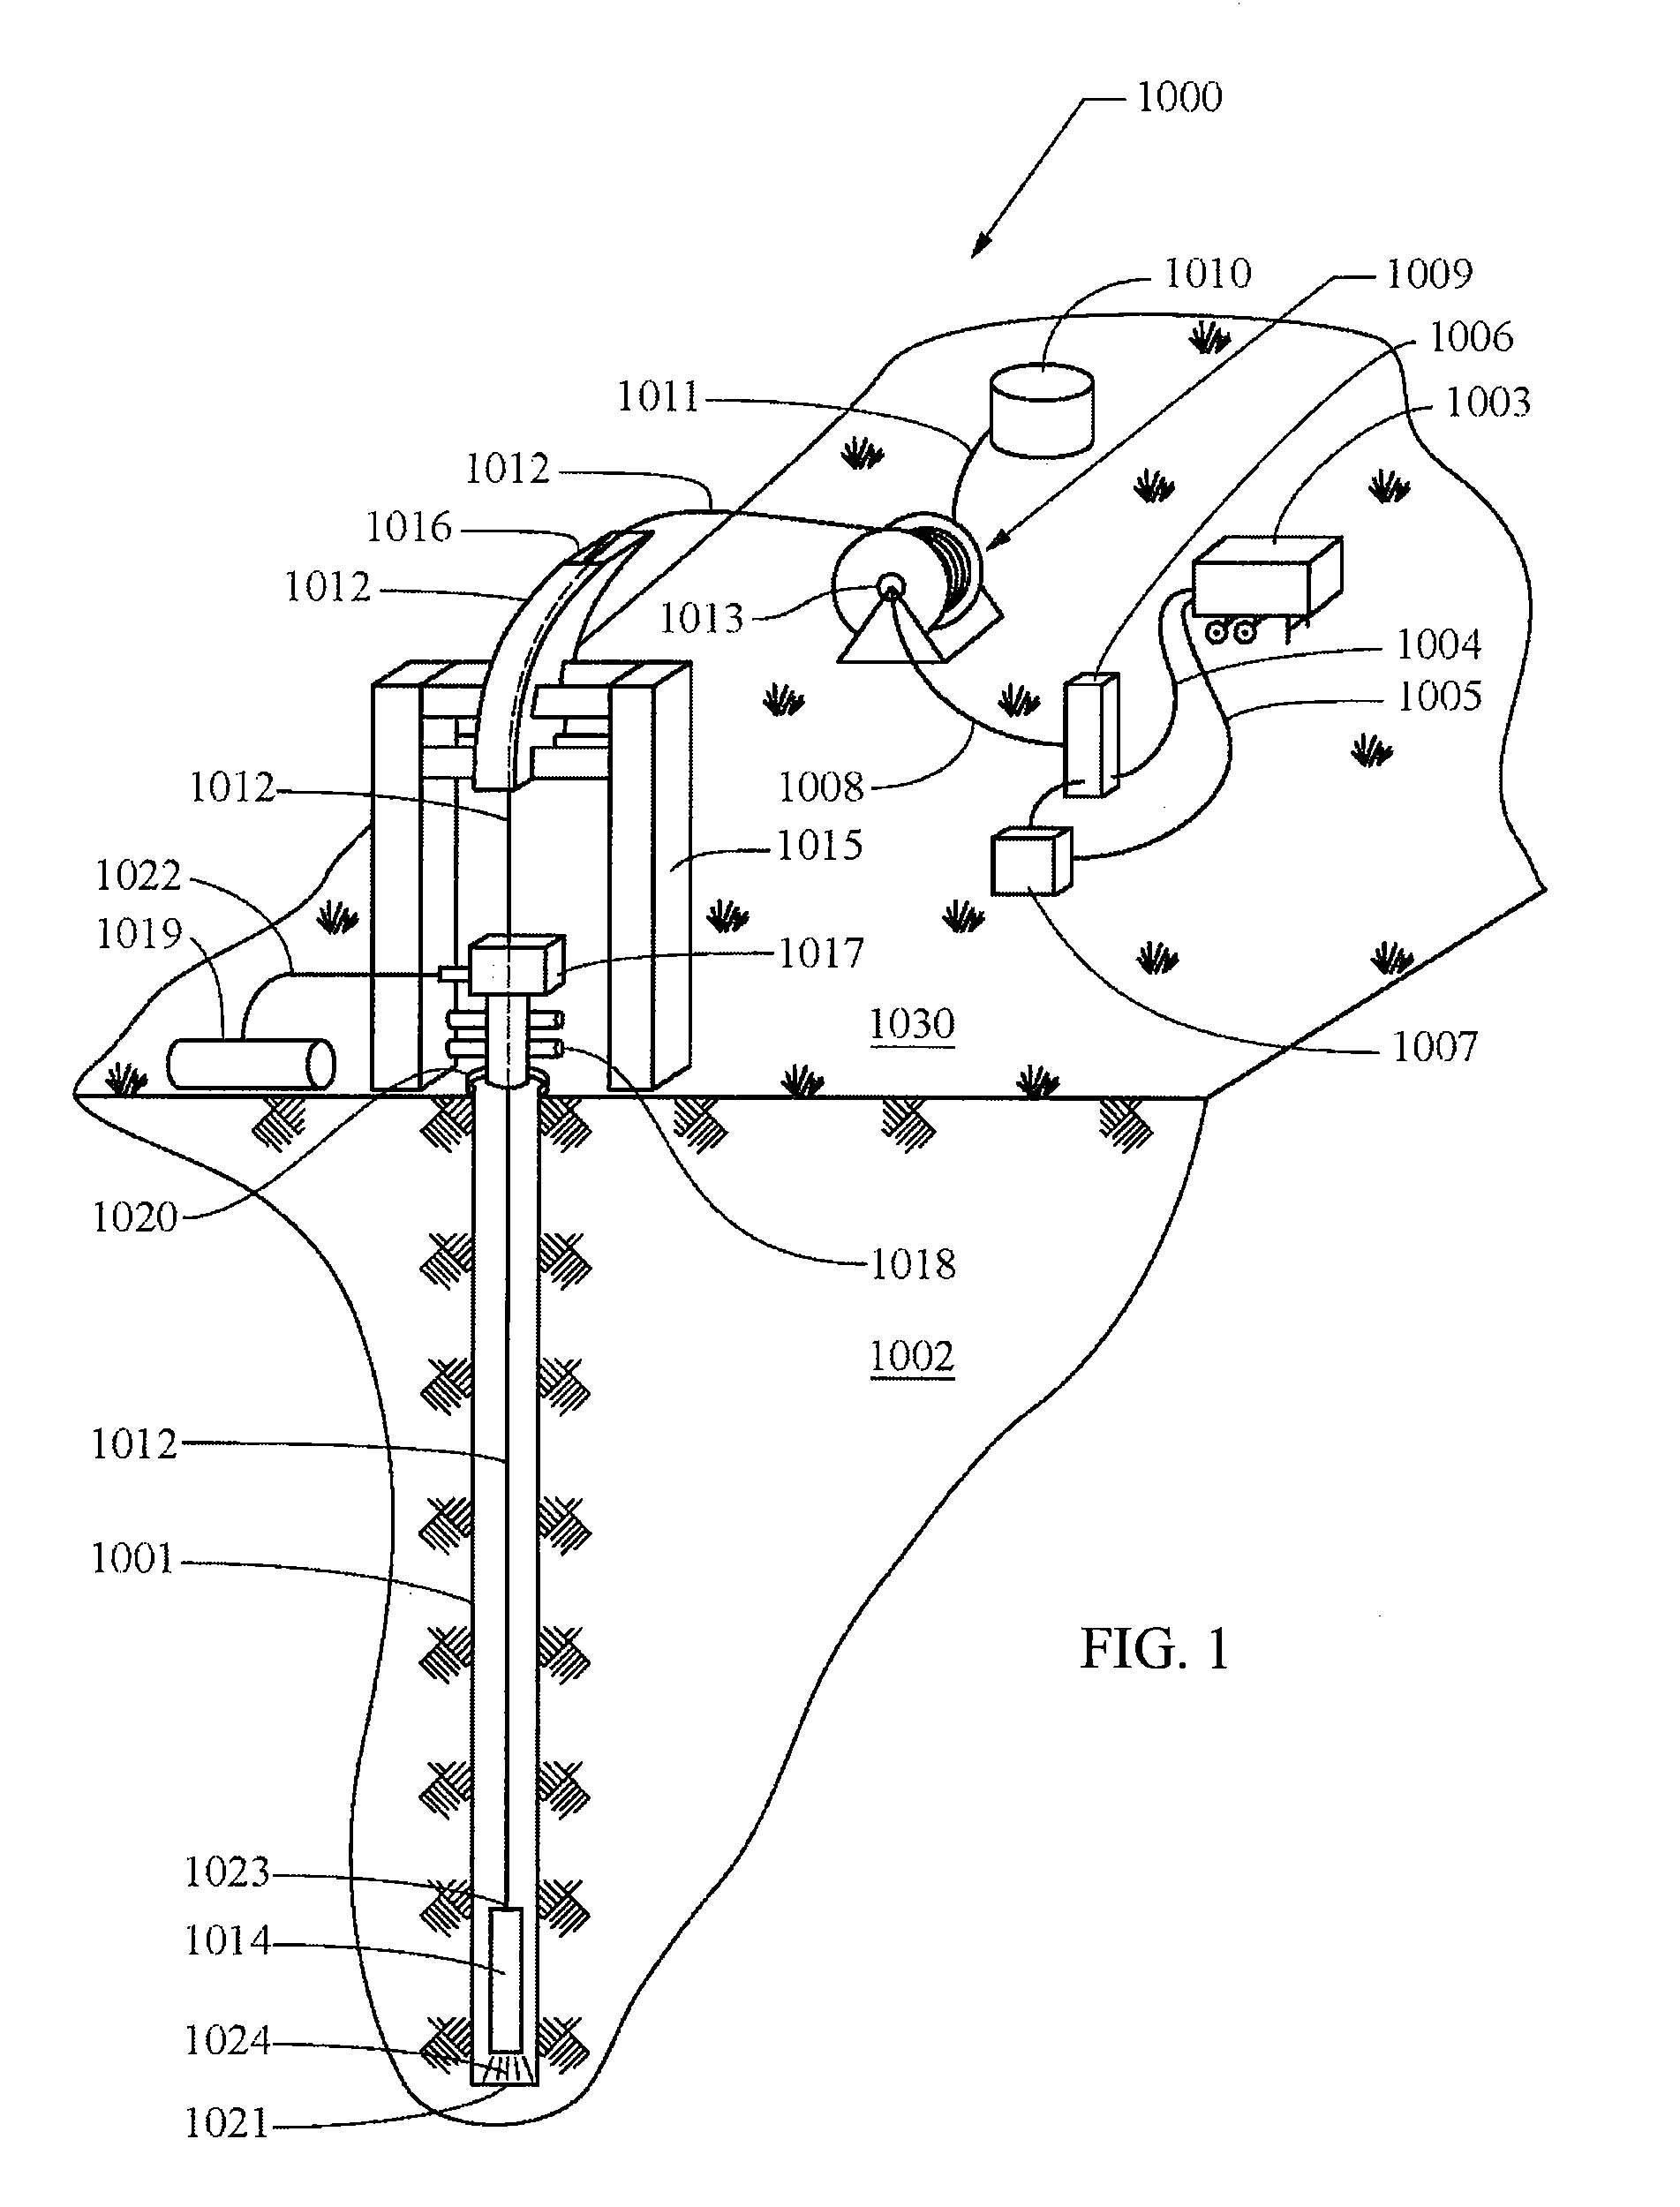 Method and system for advancement of a borehole using a high power laser